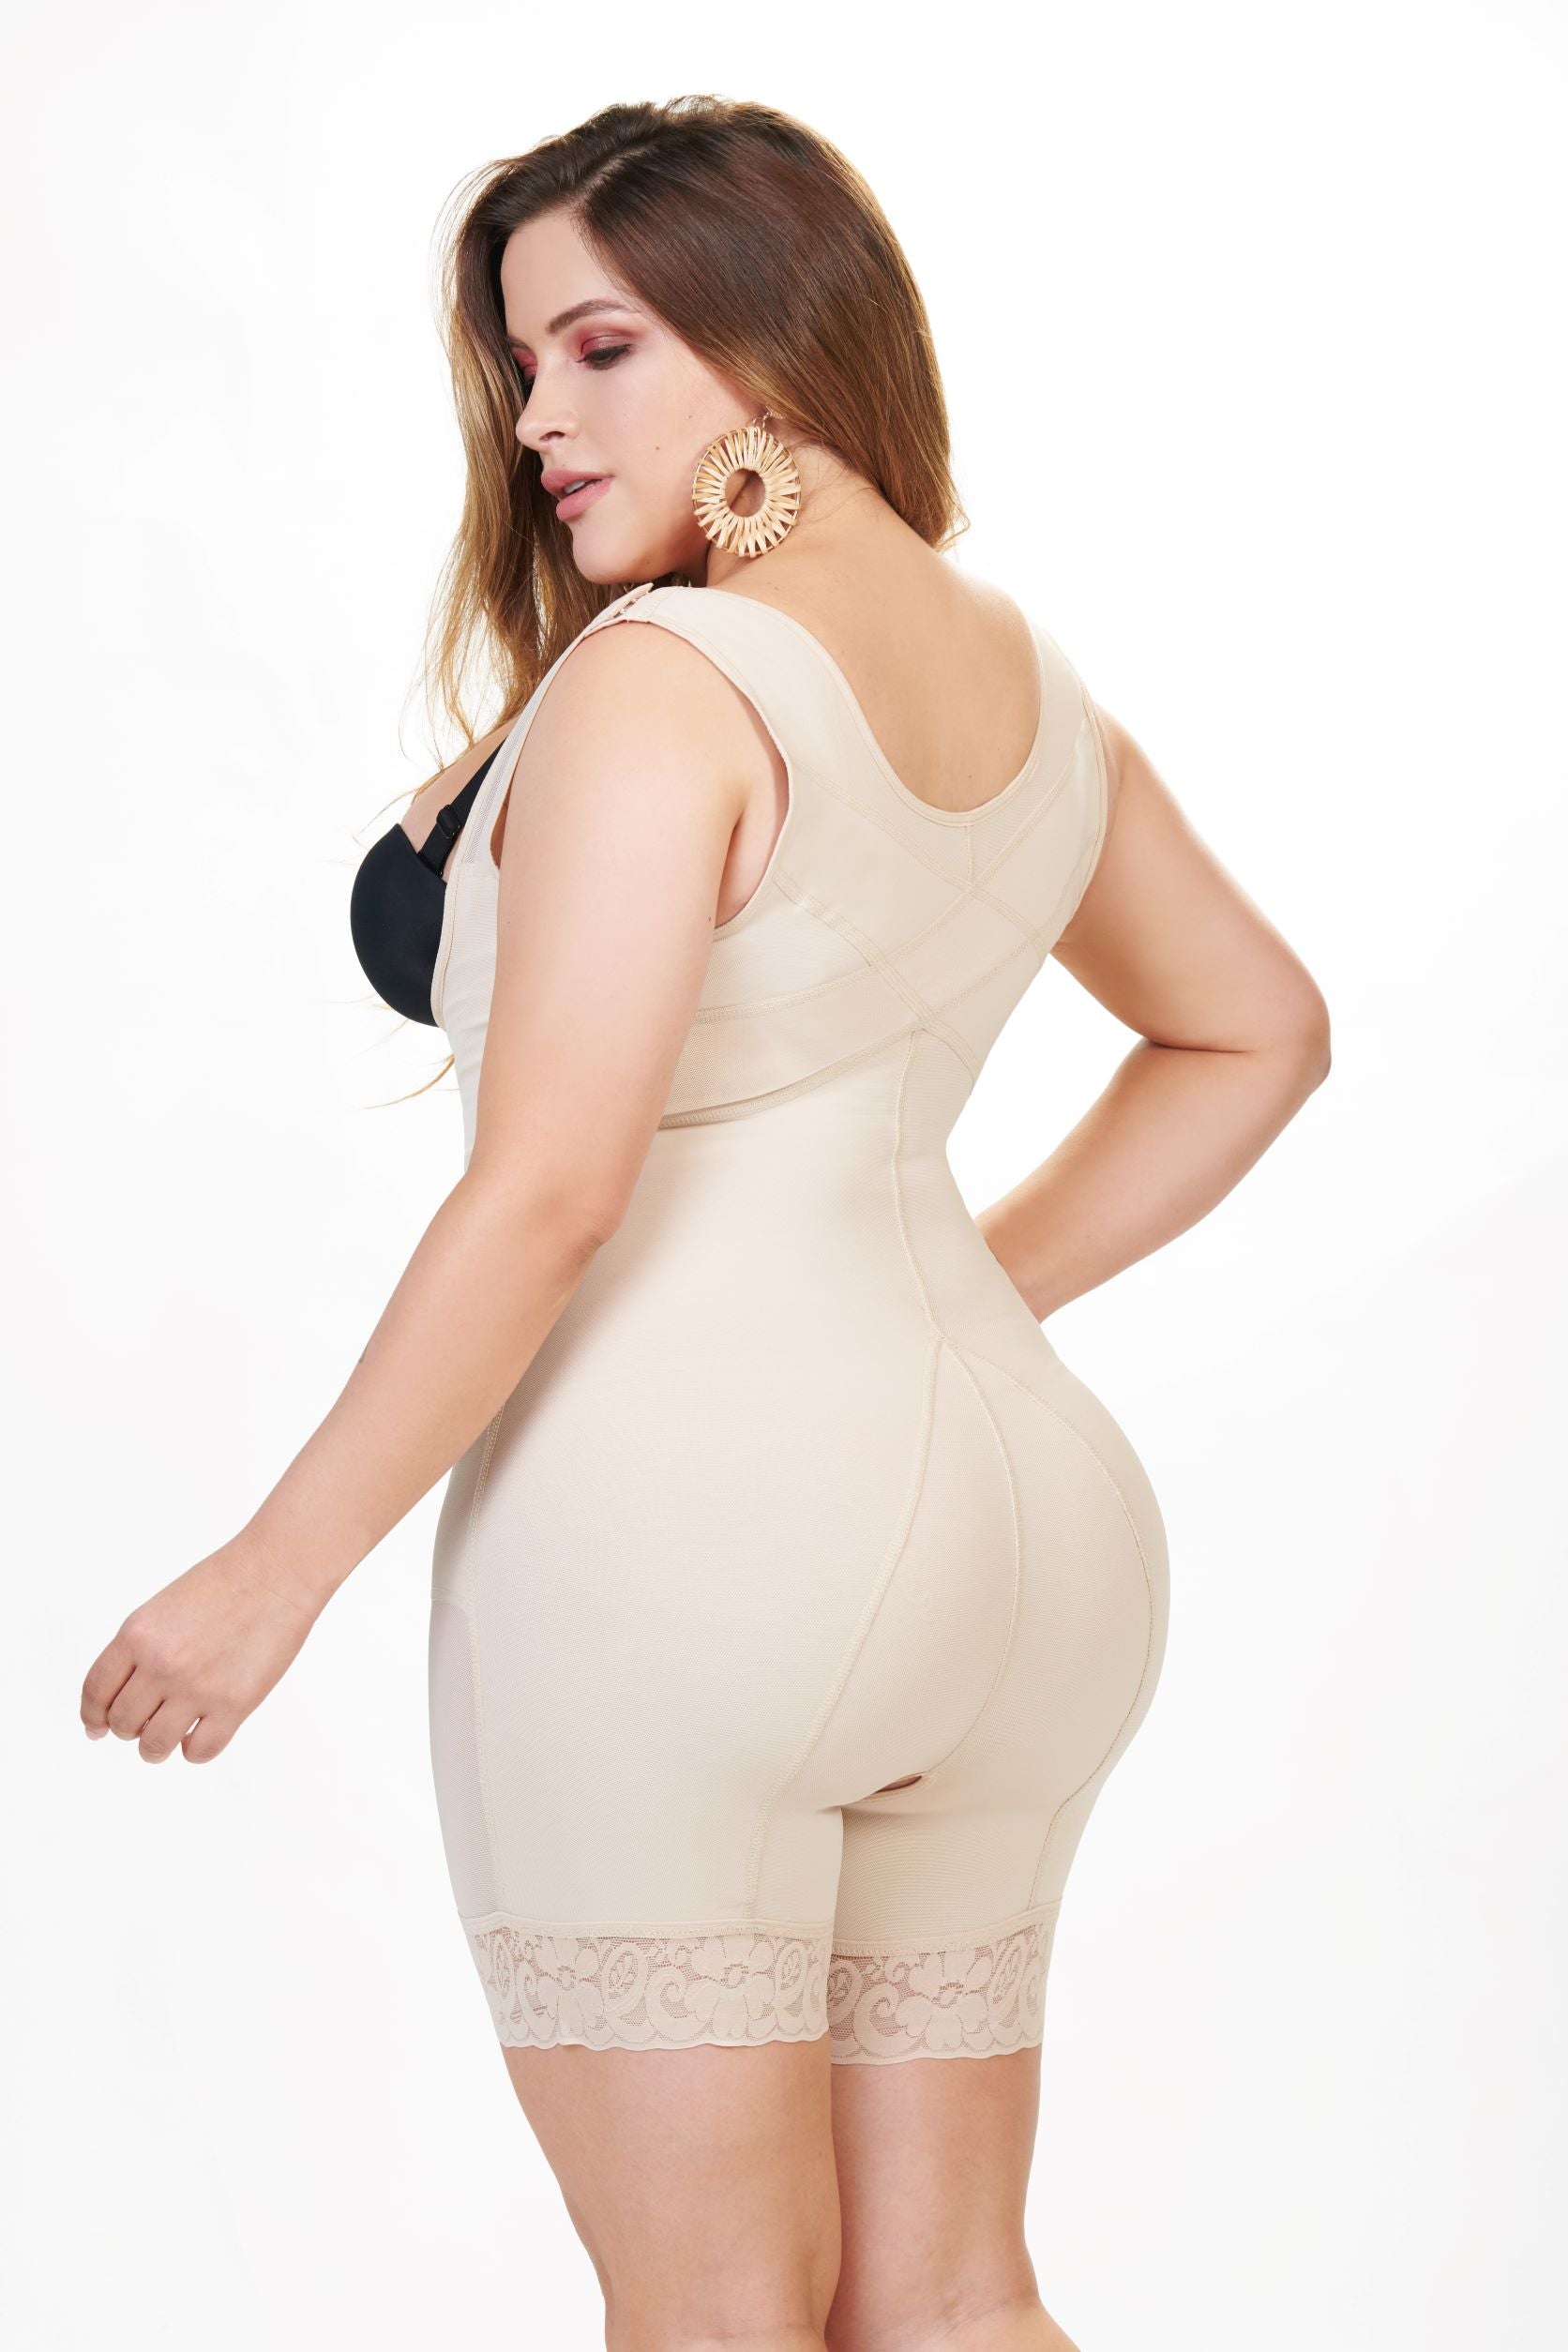 Shapewear Strong support control of the abdomen waist legs and